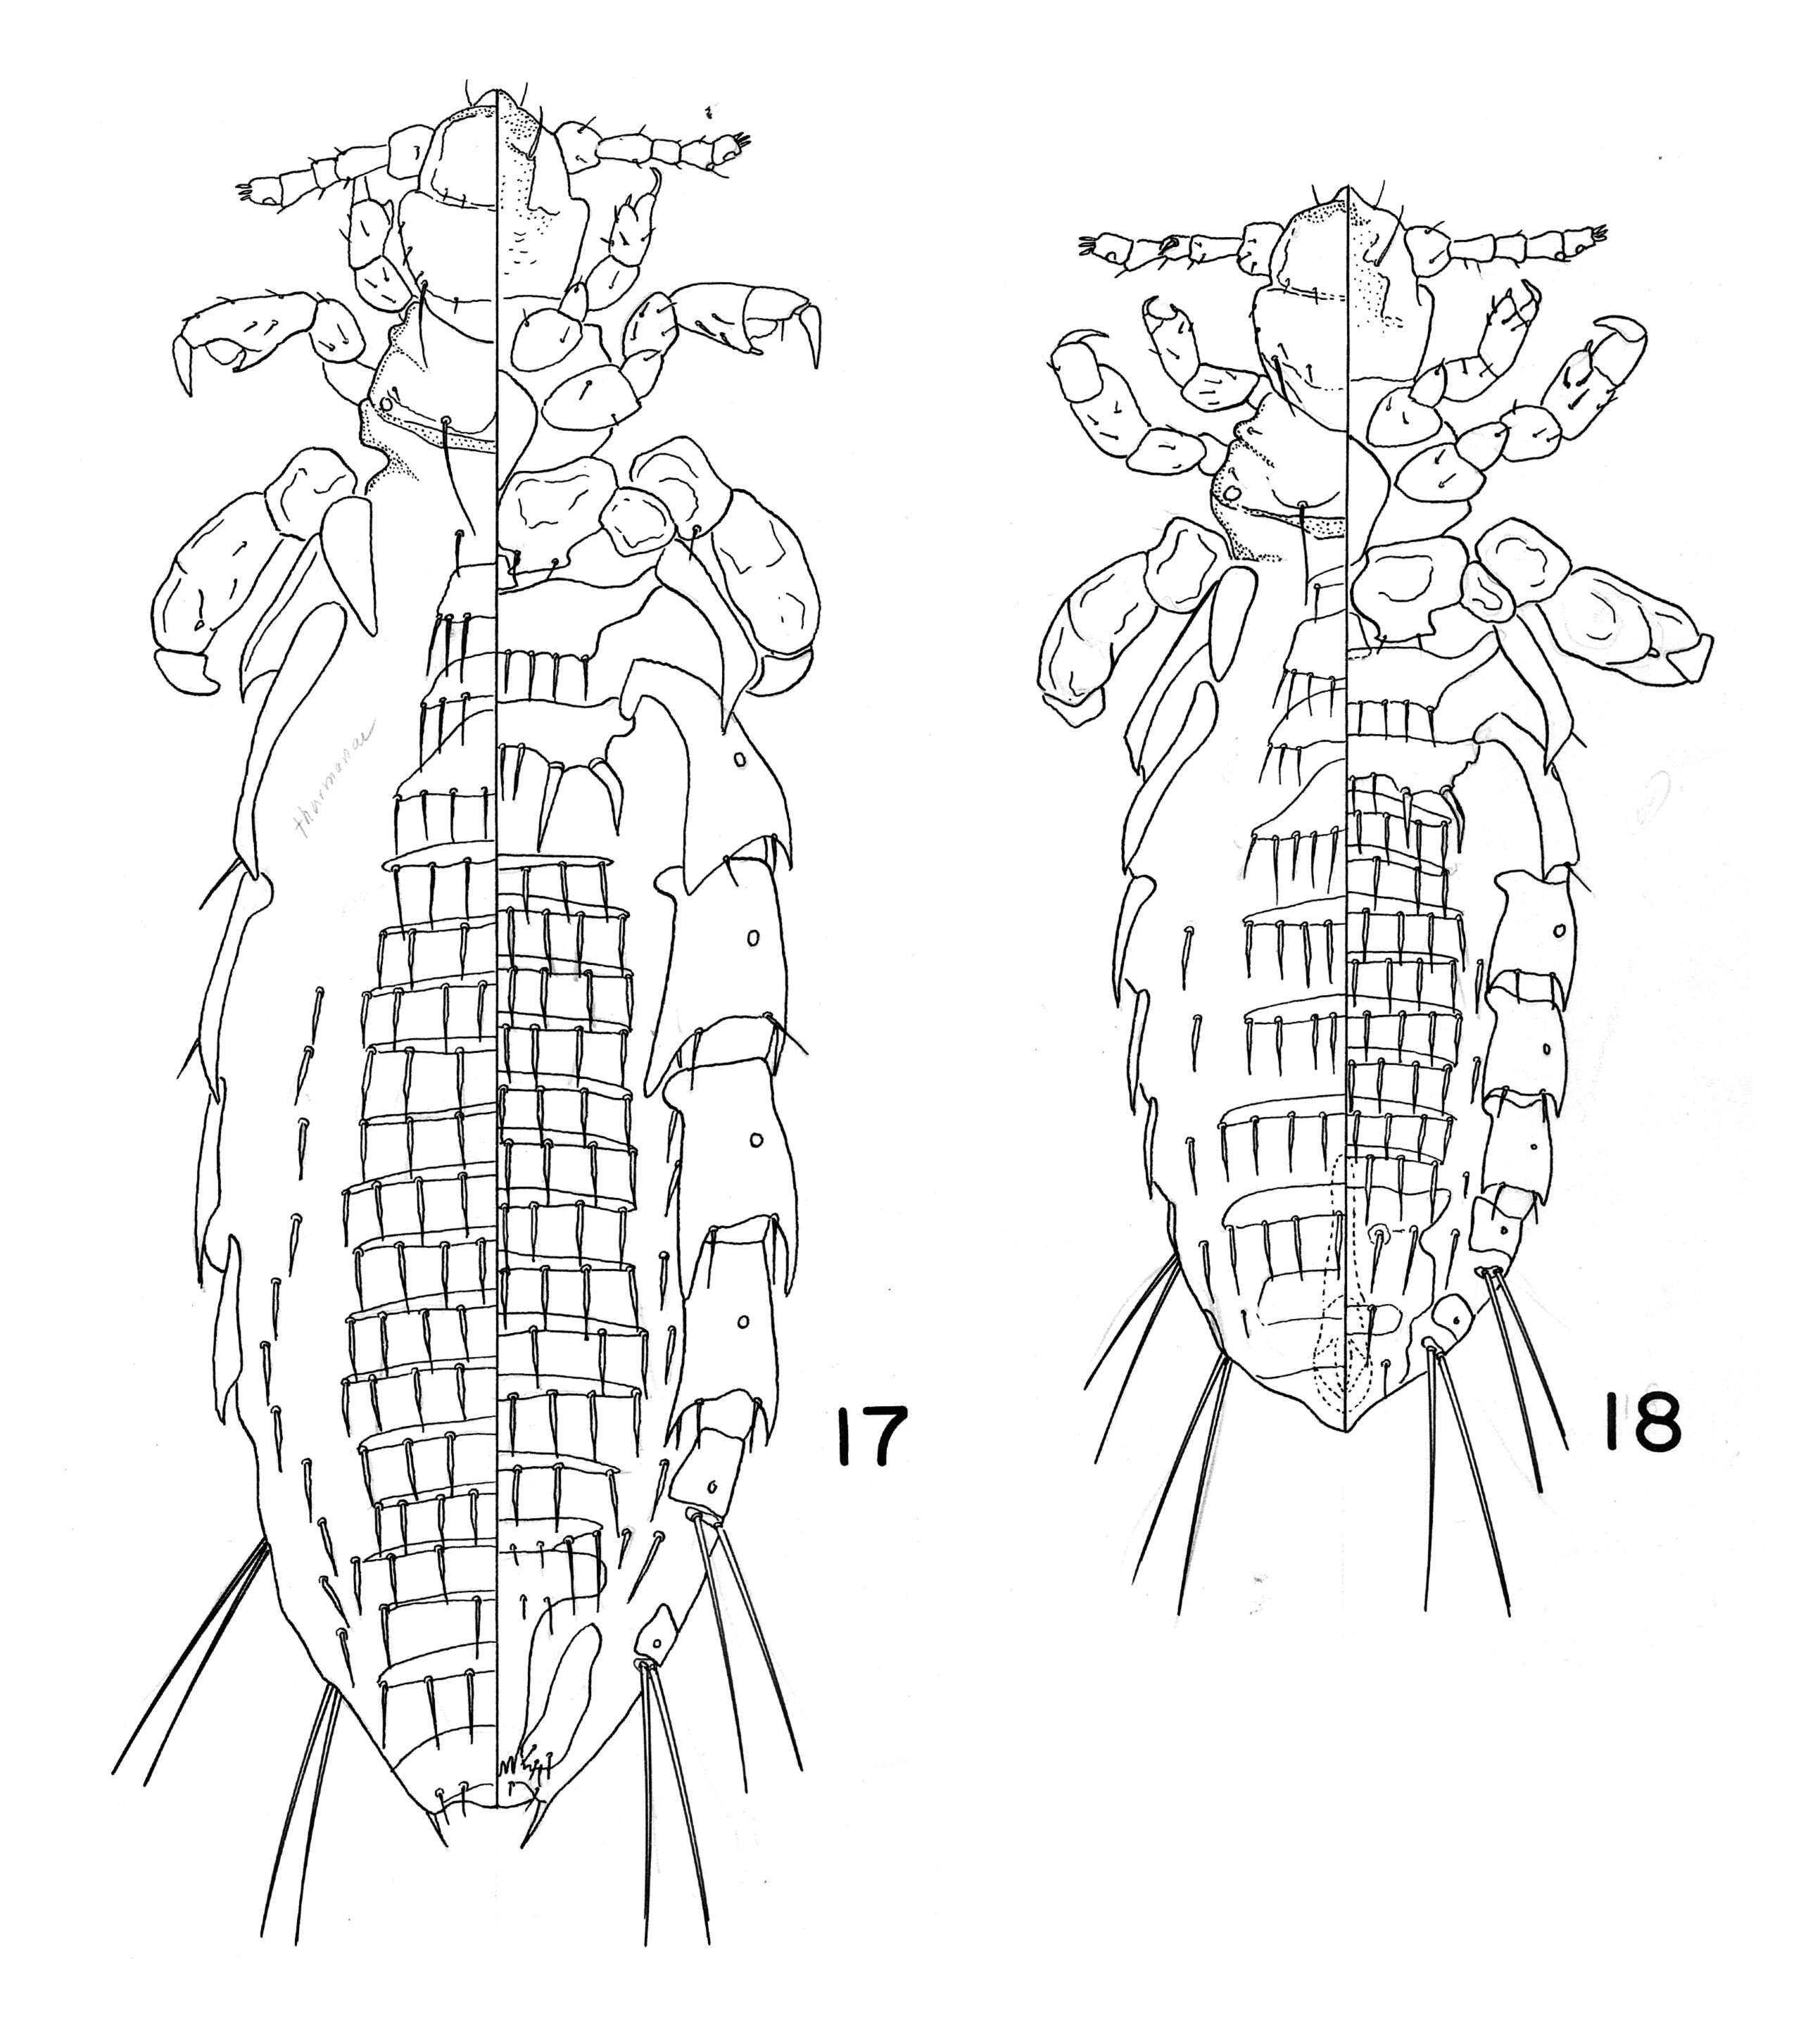 Image of armoured lice